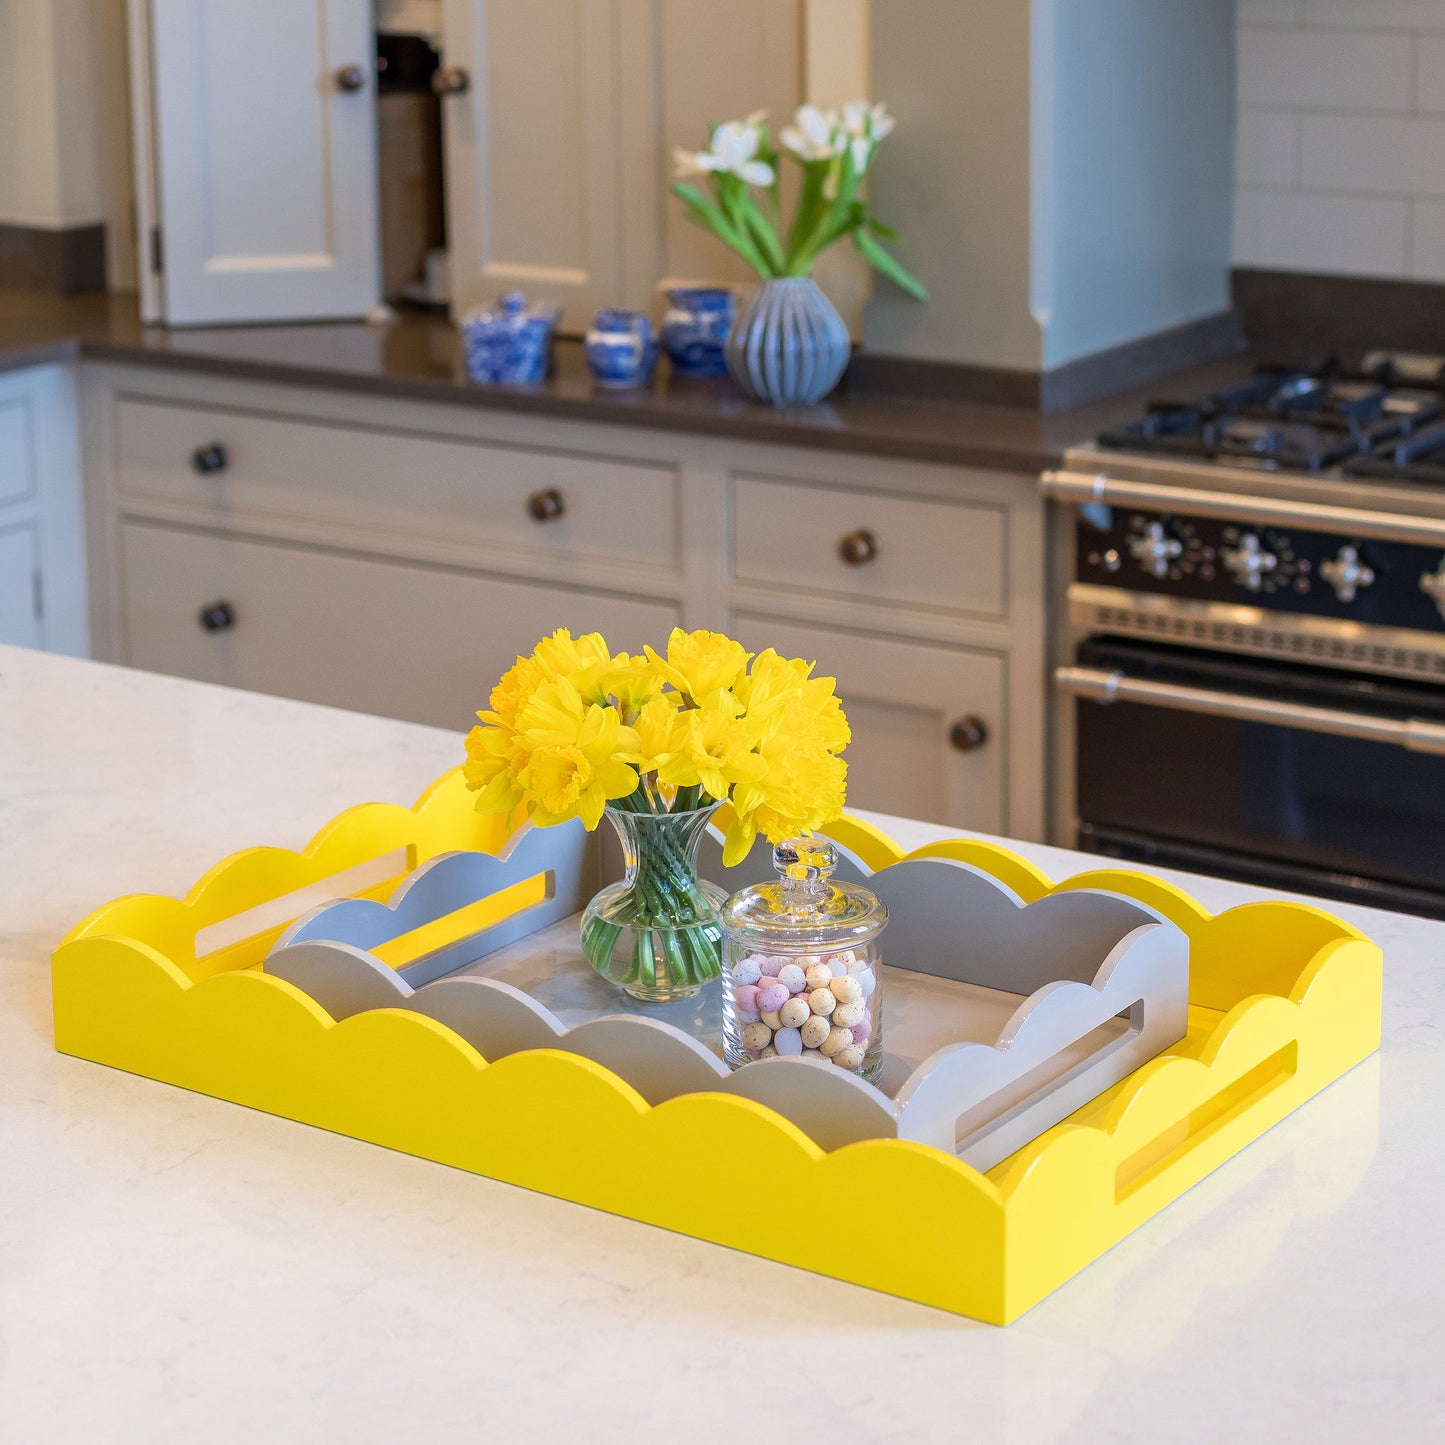 Large, yellow lacquer tray and a small chiffon gray serving tray